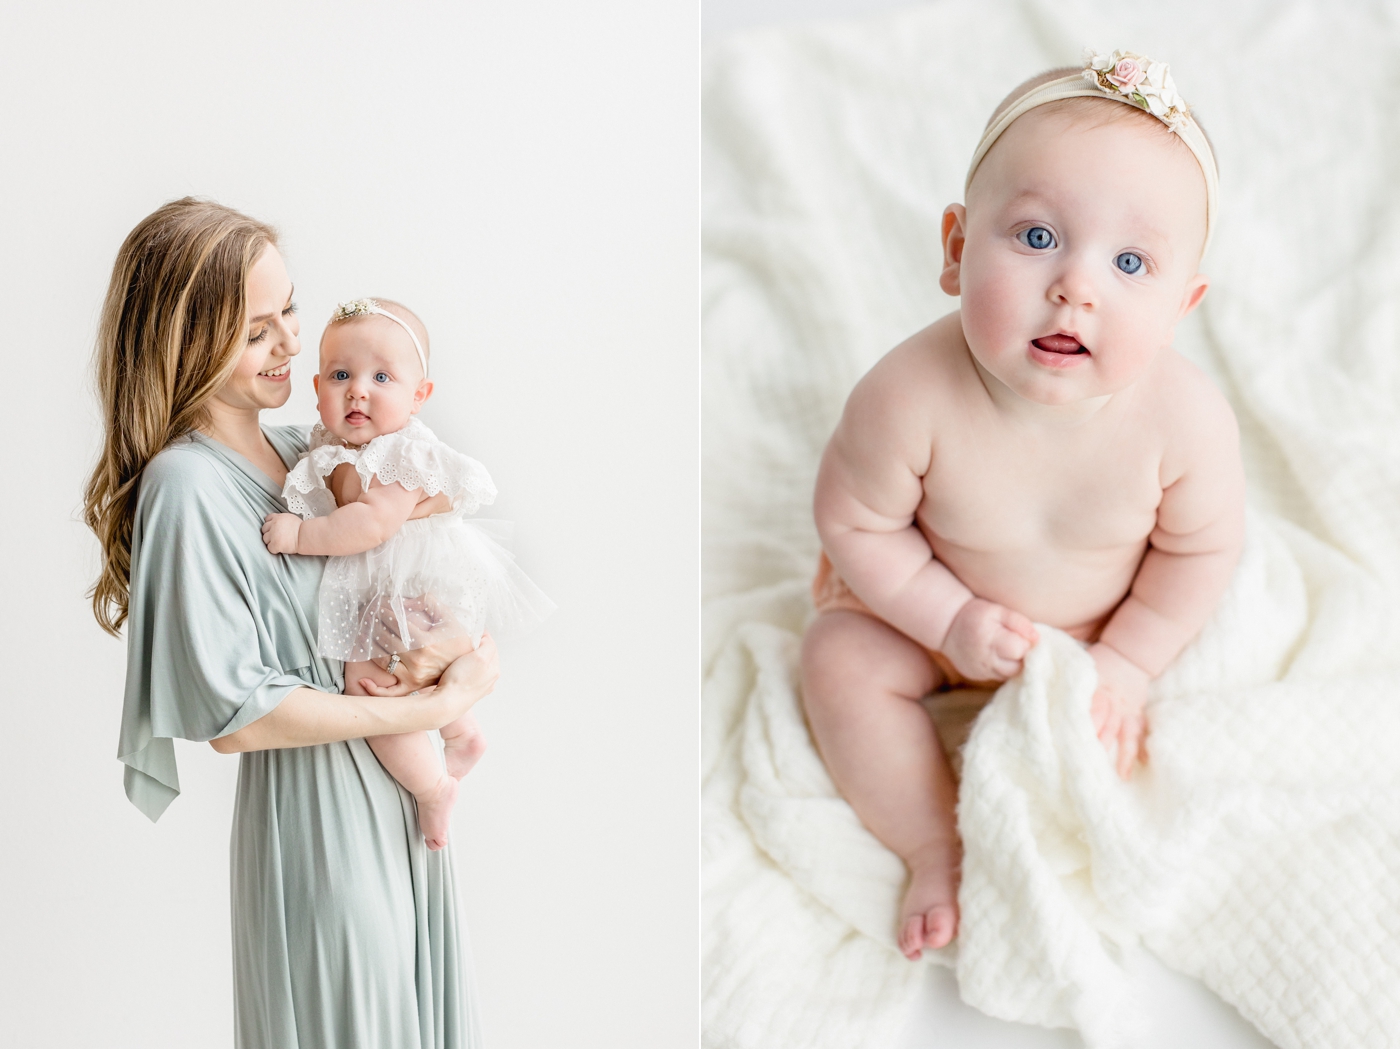 Photos of chunky baby with her Mom during studio milestone session with Sana Ahmed Photography.